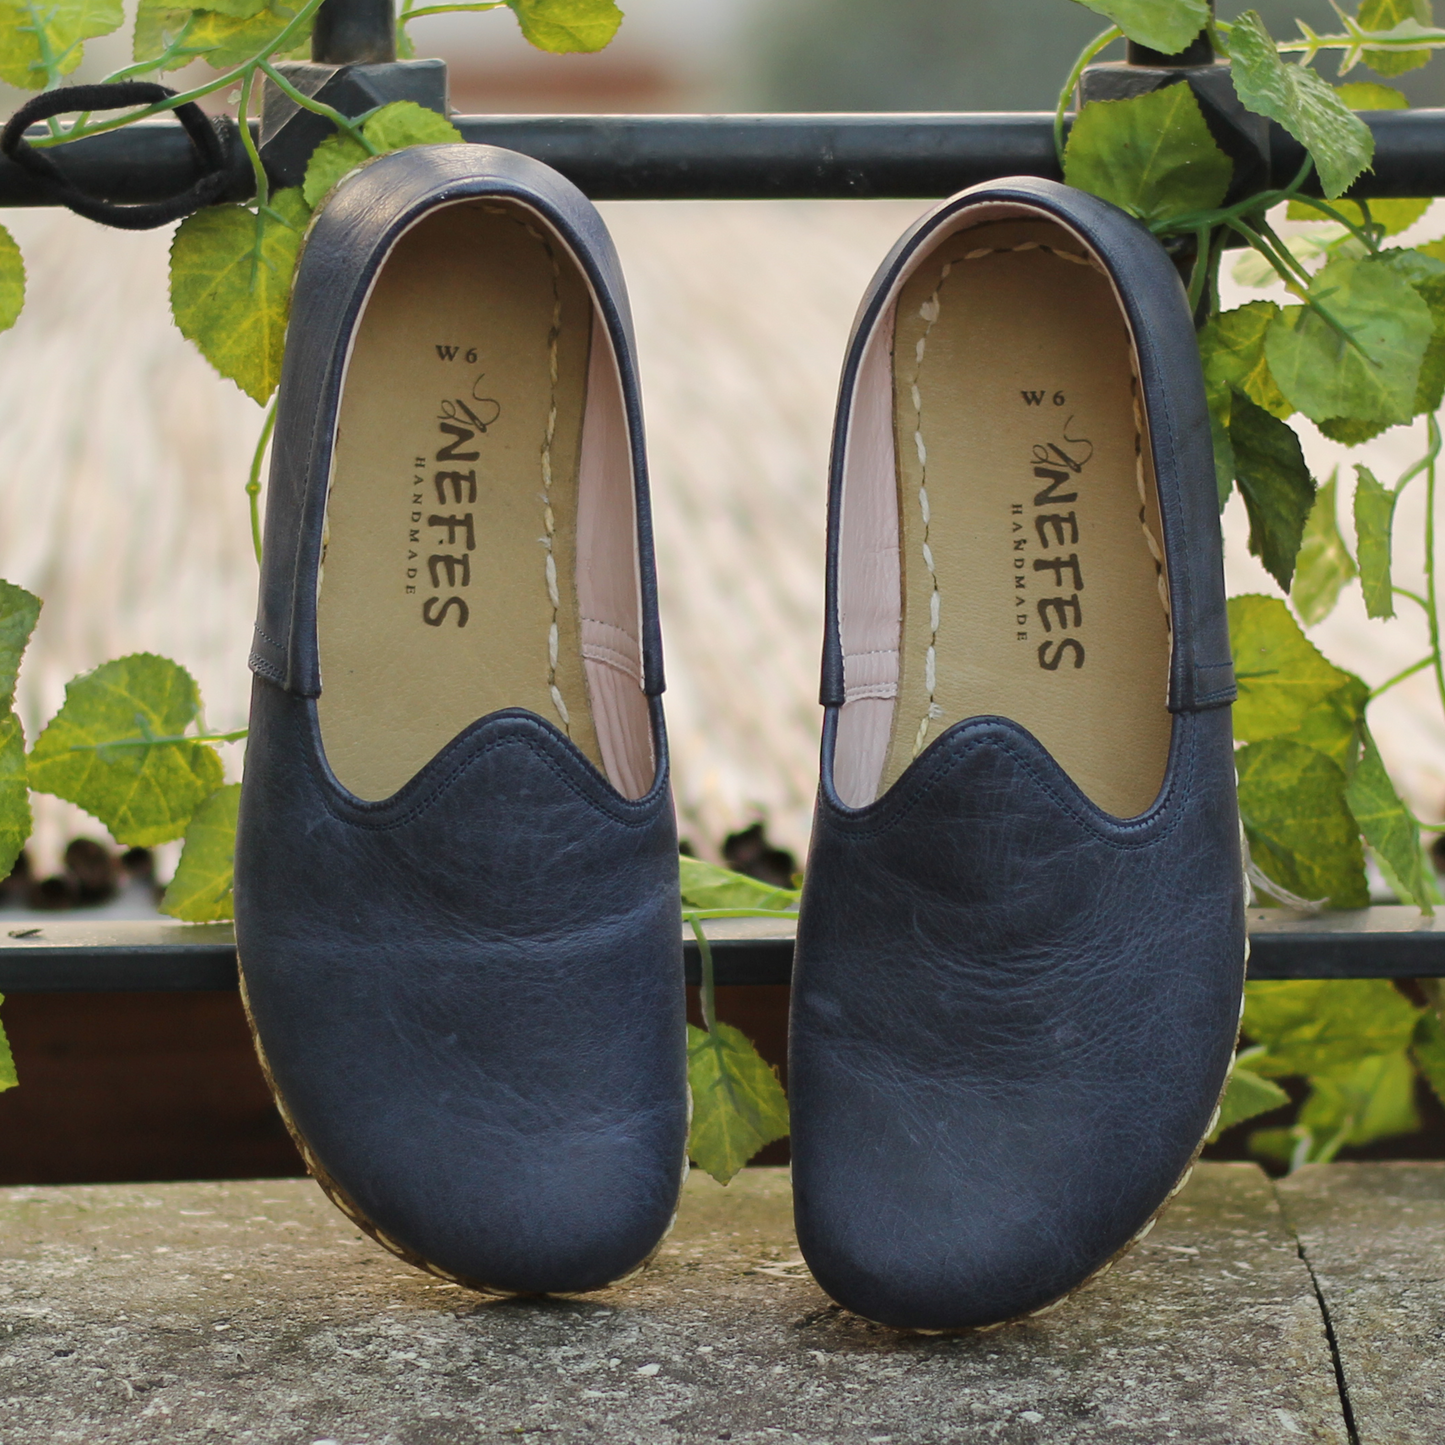 Classic Crazy Navy Blue Barefoot Shoes - Zero Drop Handmade Leather